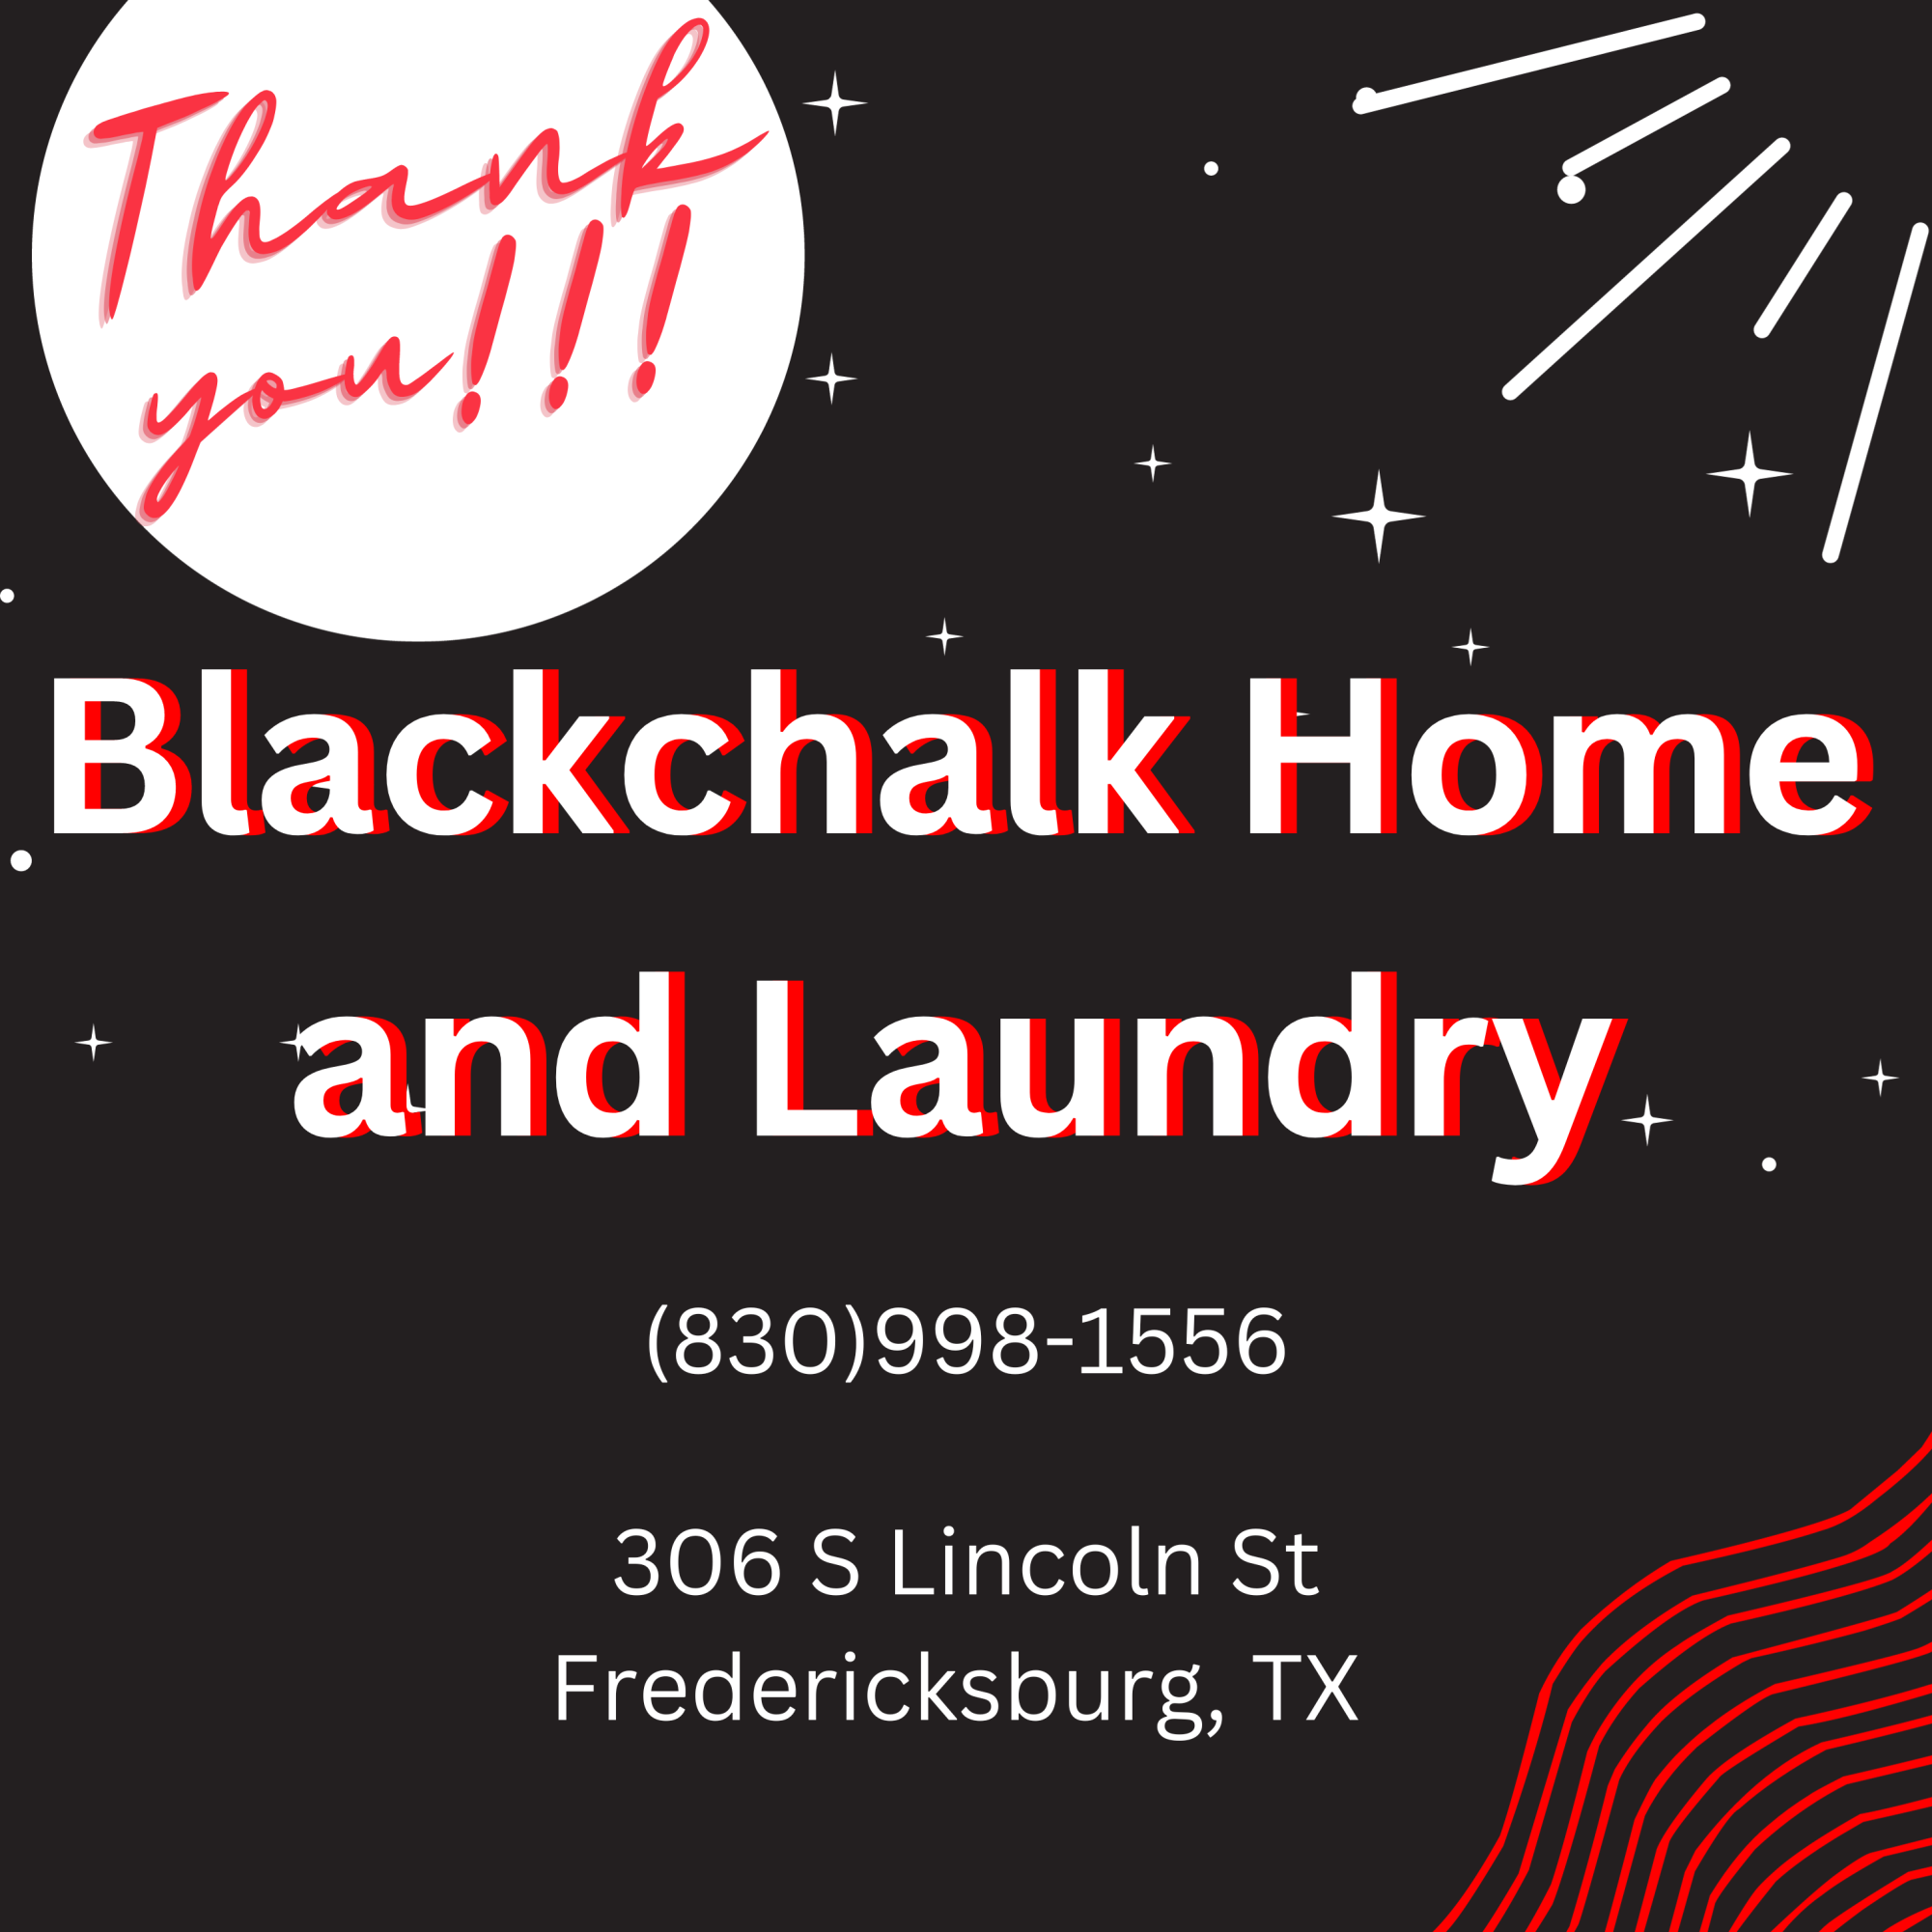 Blackchalk Home and Laundry